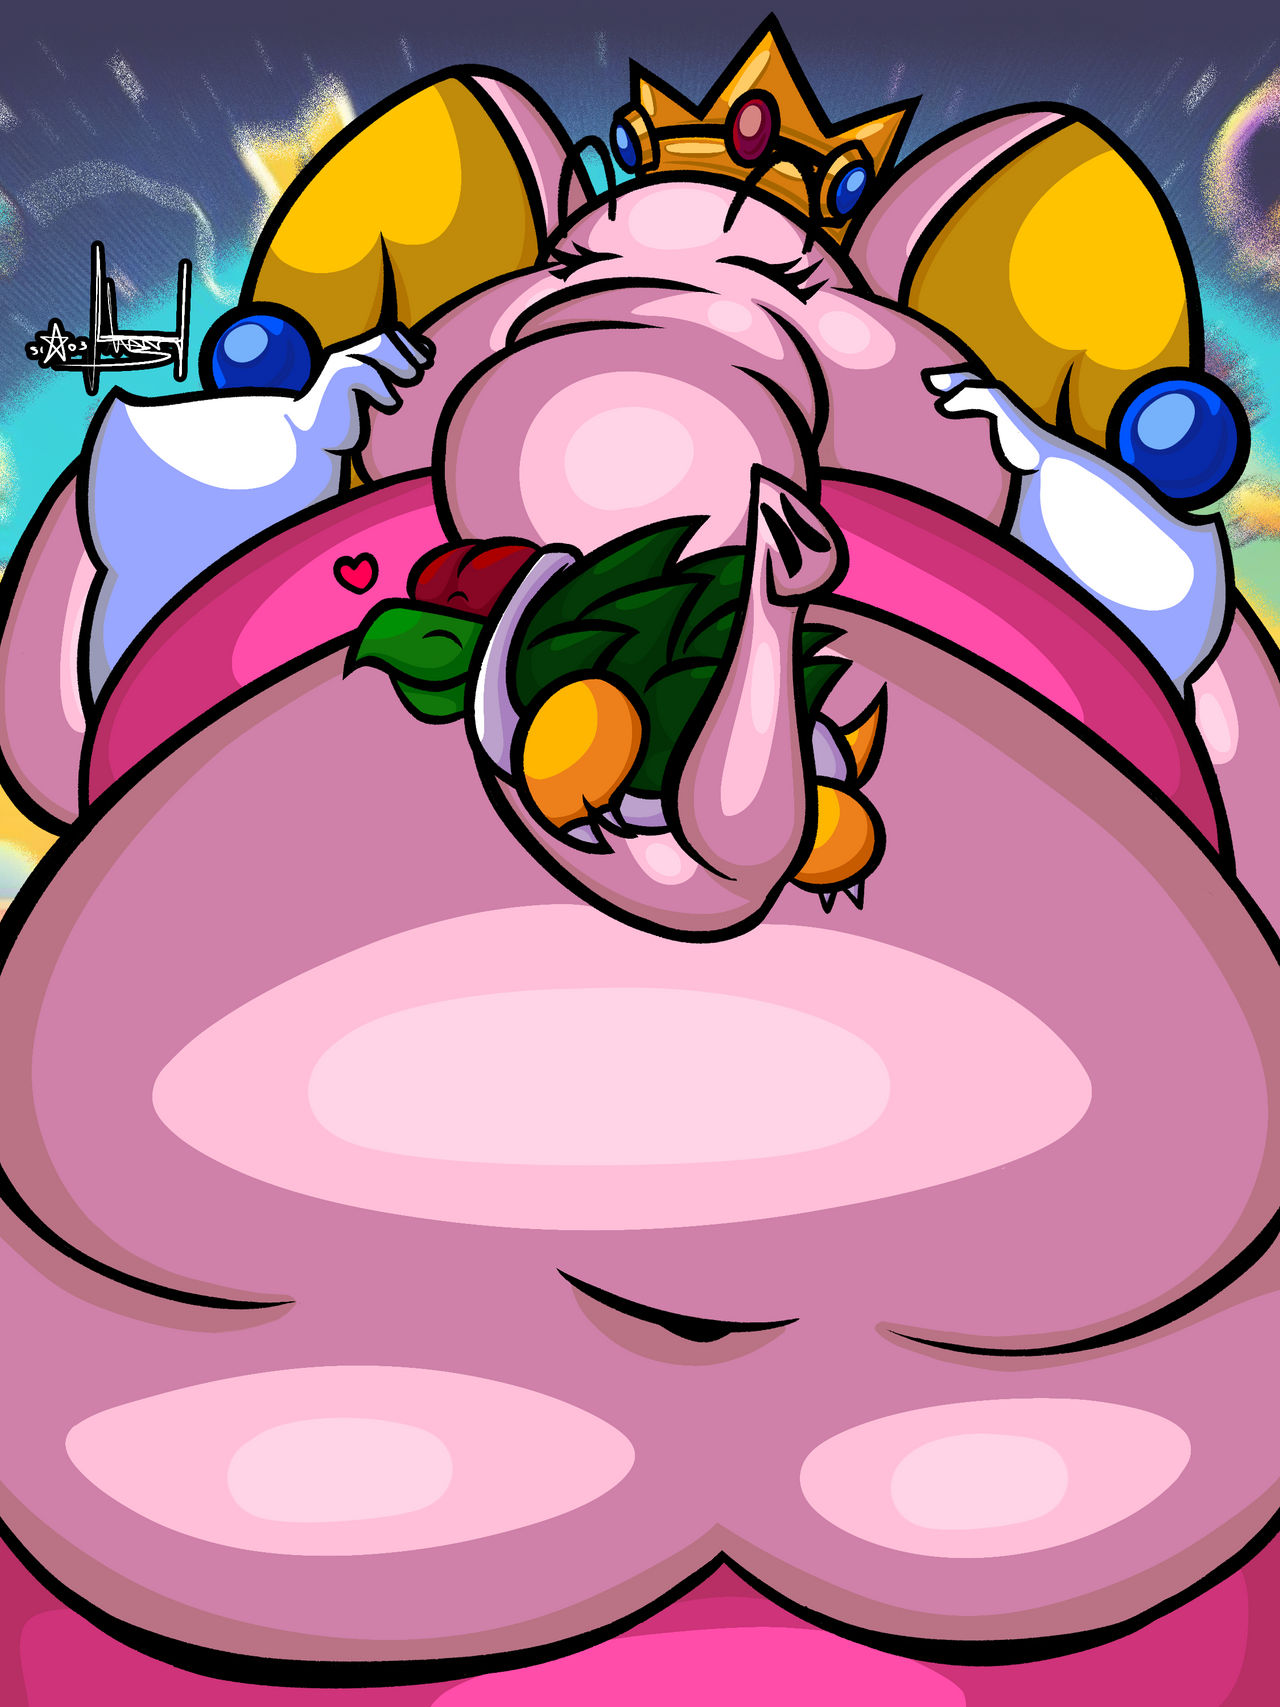 Elephant Peach and Bowser by JuacoProductionsArts on DeviantArt